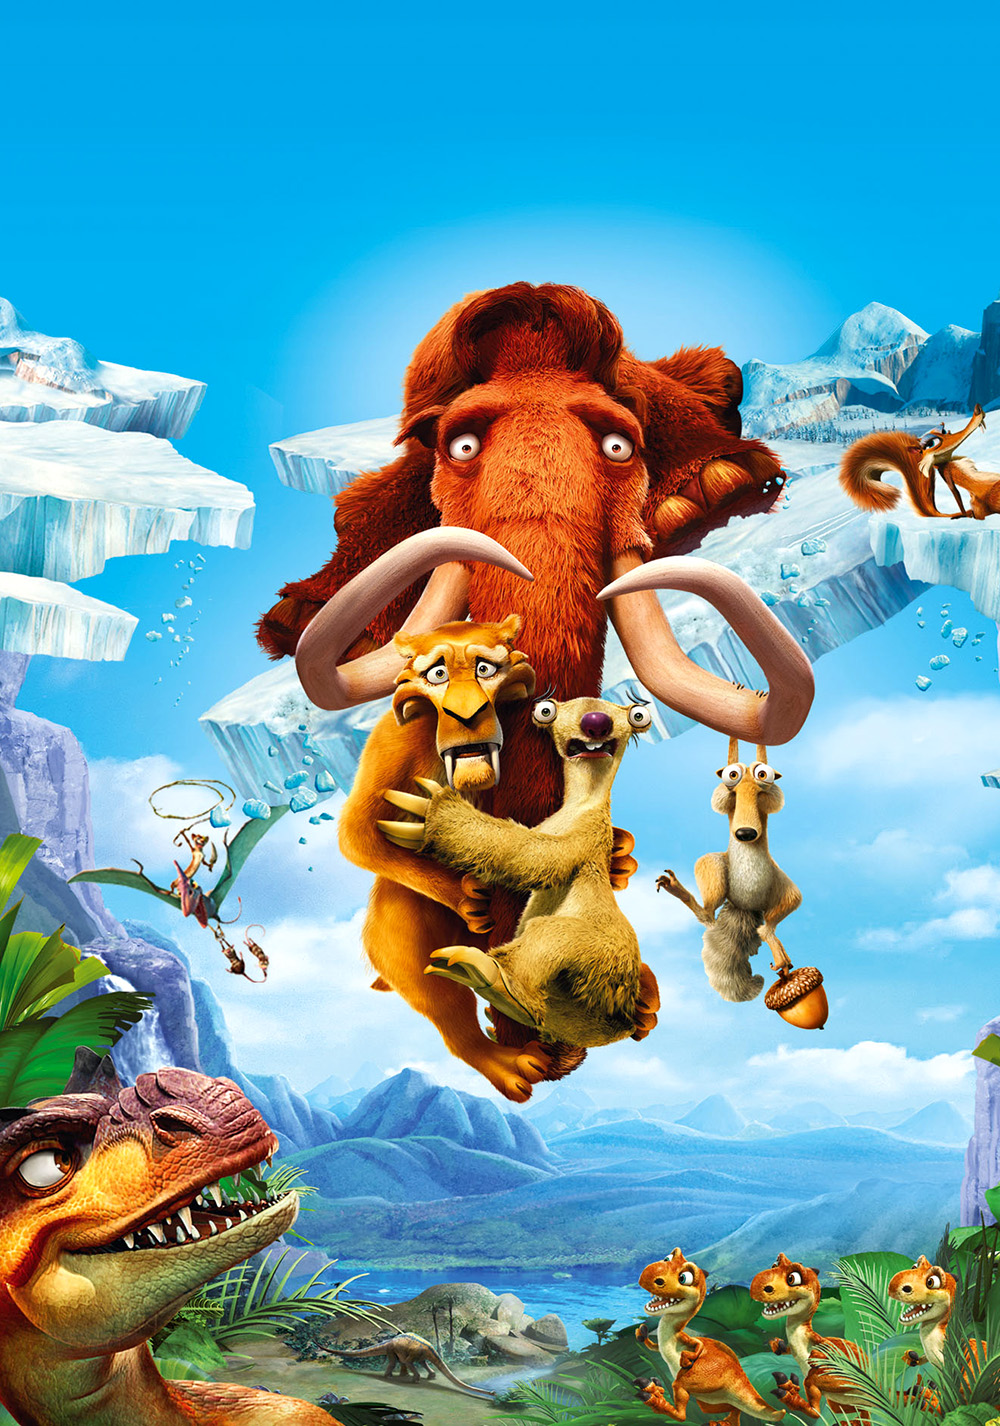 Ice Age: Dawn of the Dinosaurs download the last version for android